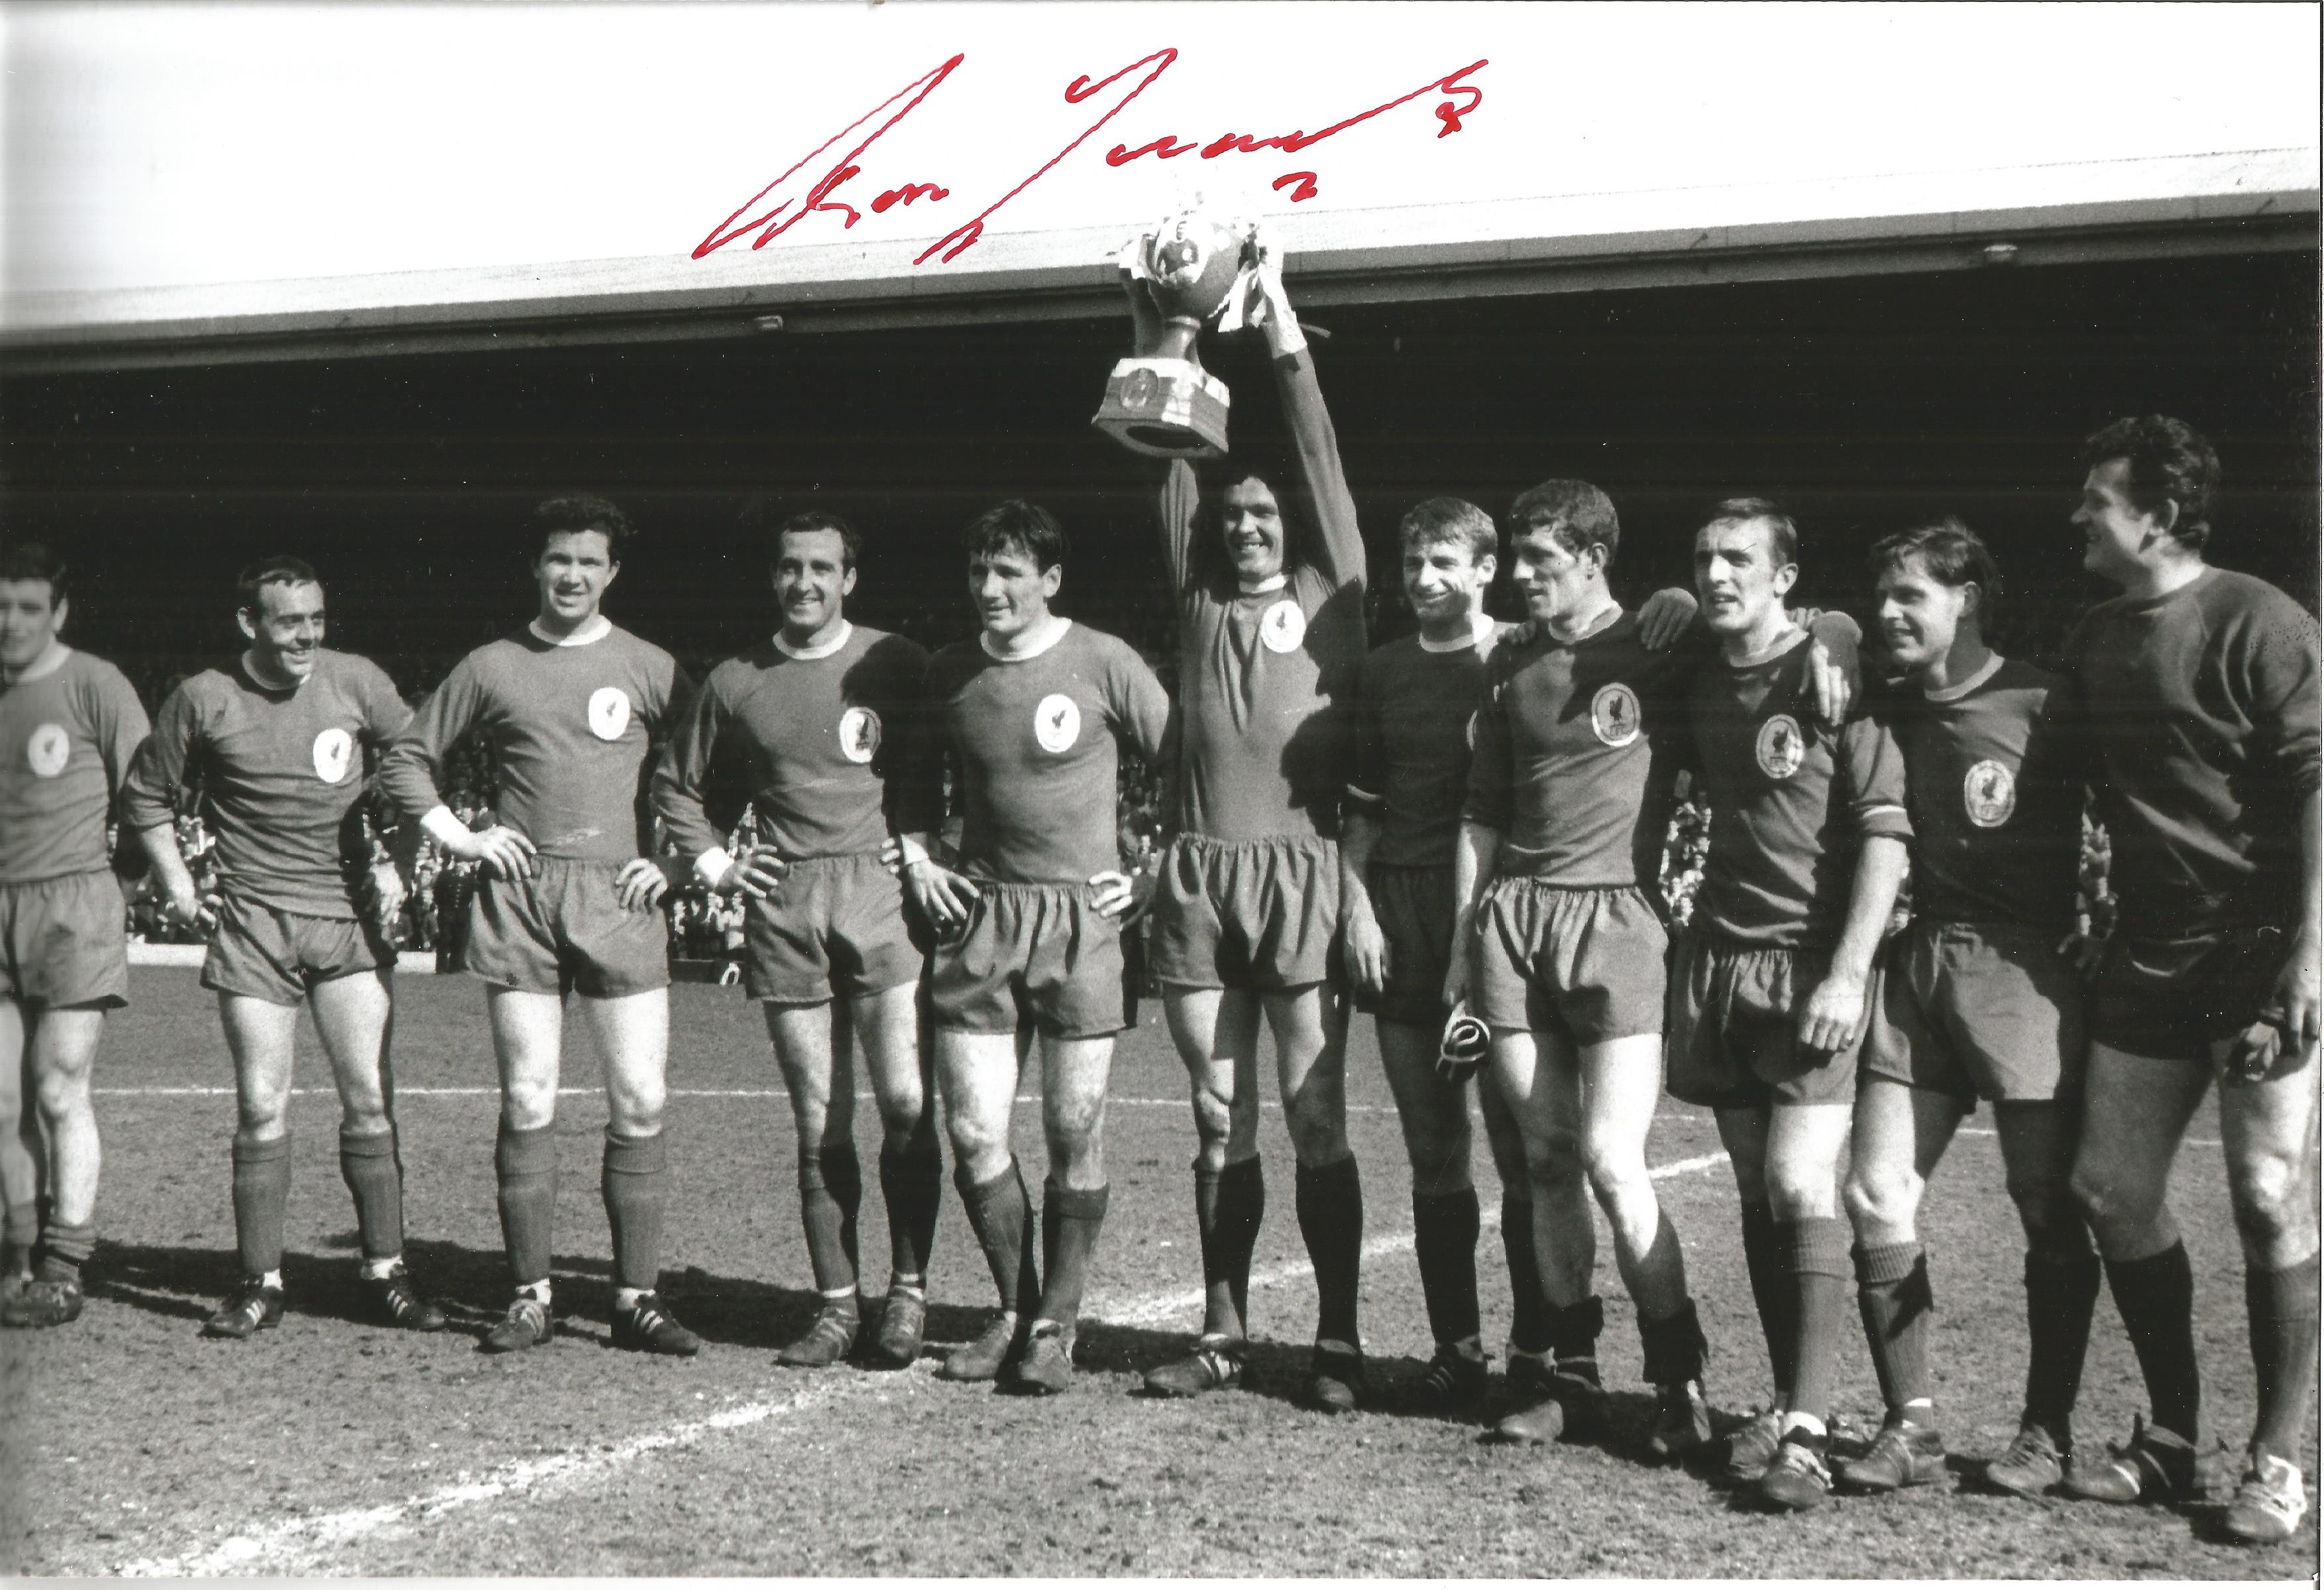 Football Ron Yeats 12x8 signed black and white photo. Good Condition. All autographs are genuine